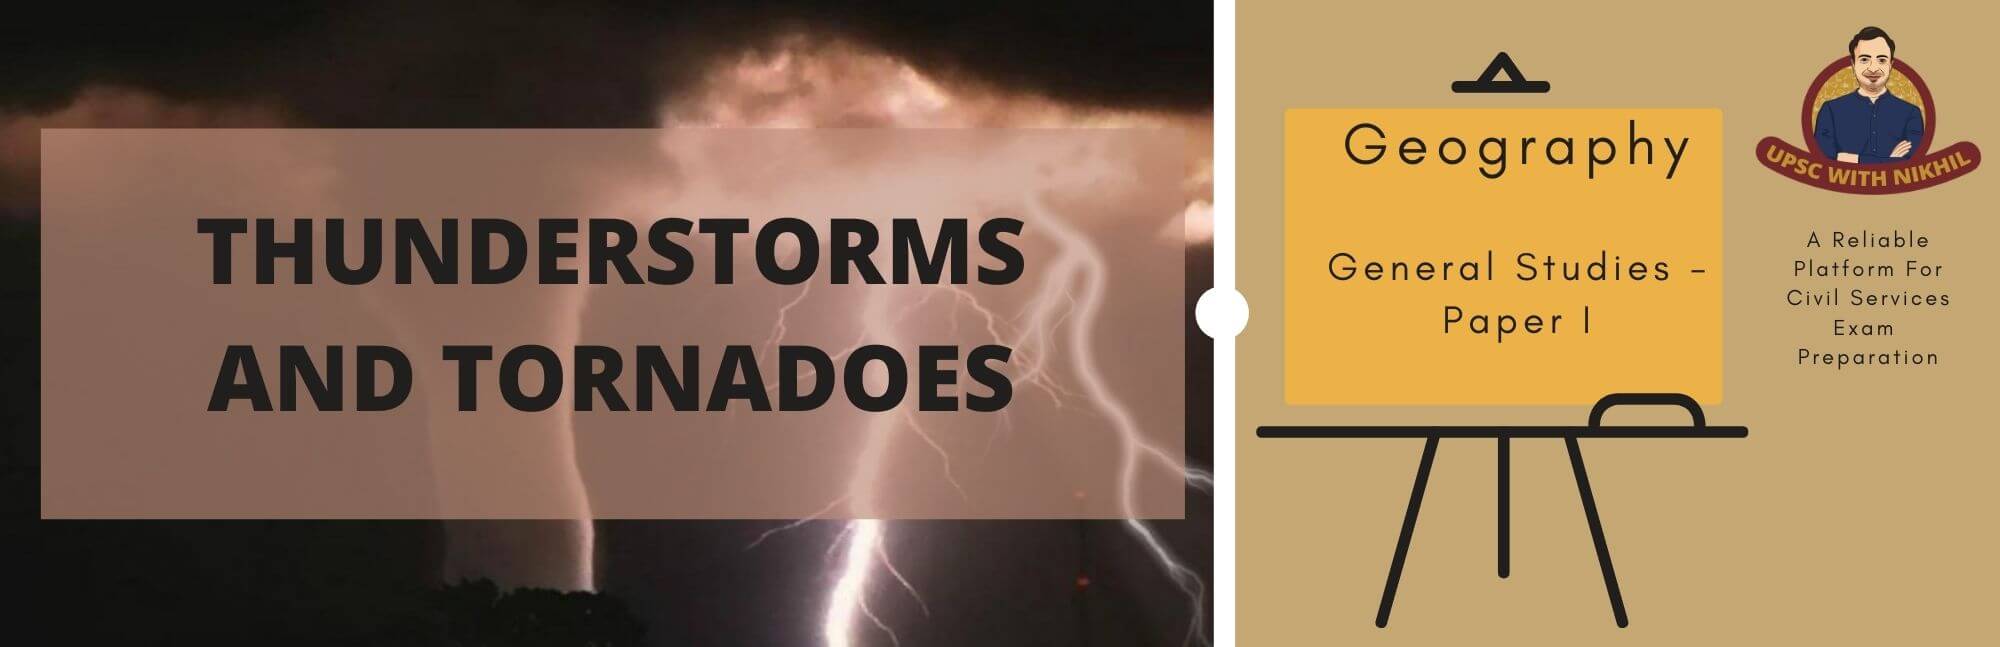 Thunderstorms And Tornadoes